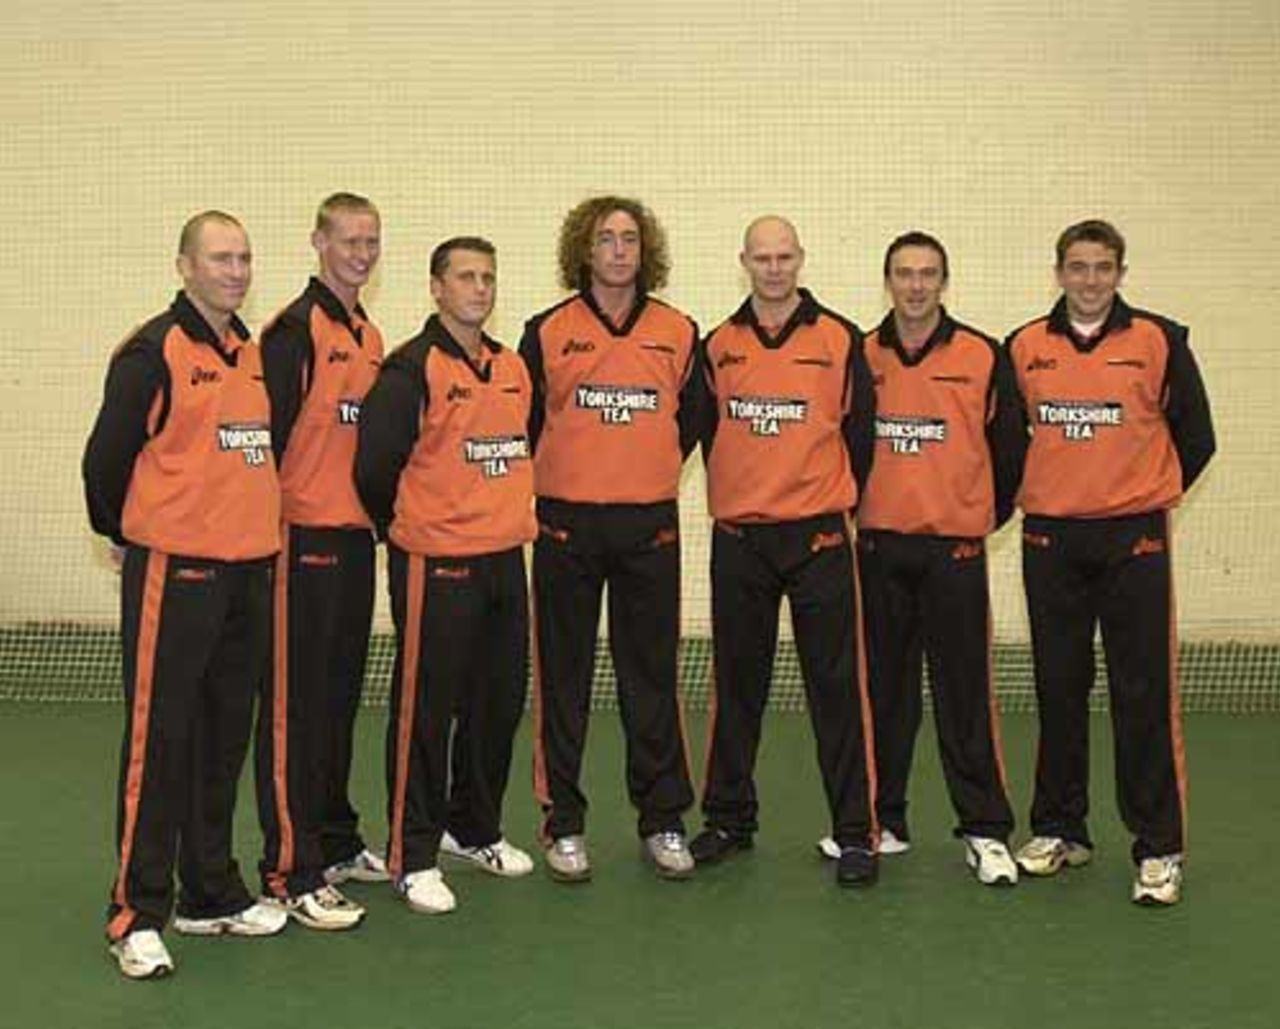 Pictured at the April 2001 Yorkshire CCC Photocall -- left to right , White, Hutchison, Gough, Sidebottom, Hoggard, Hamilton and Silverwood